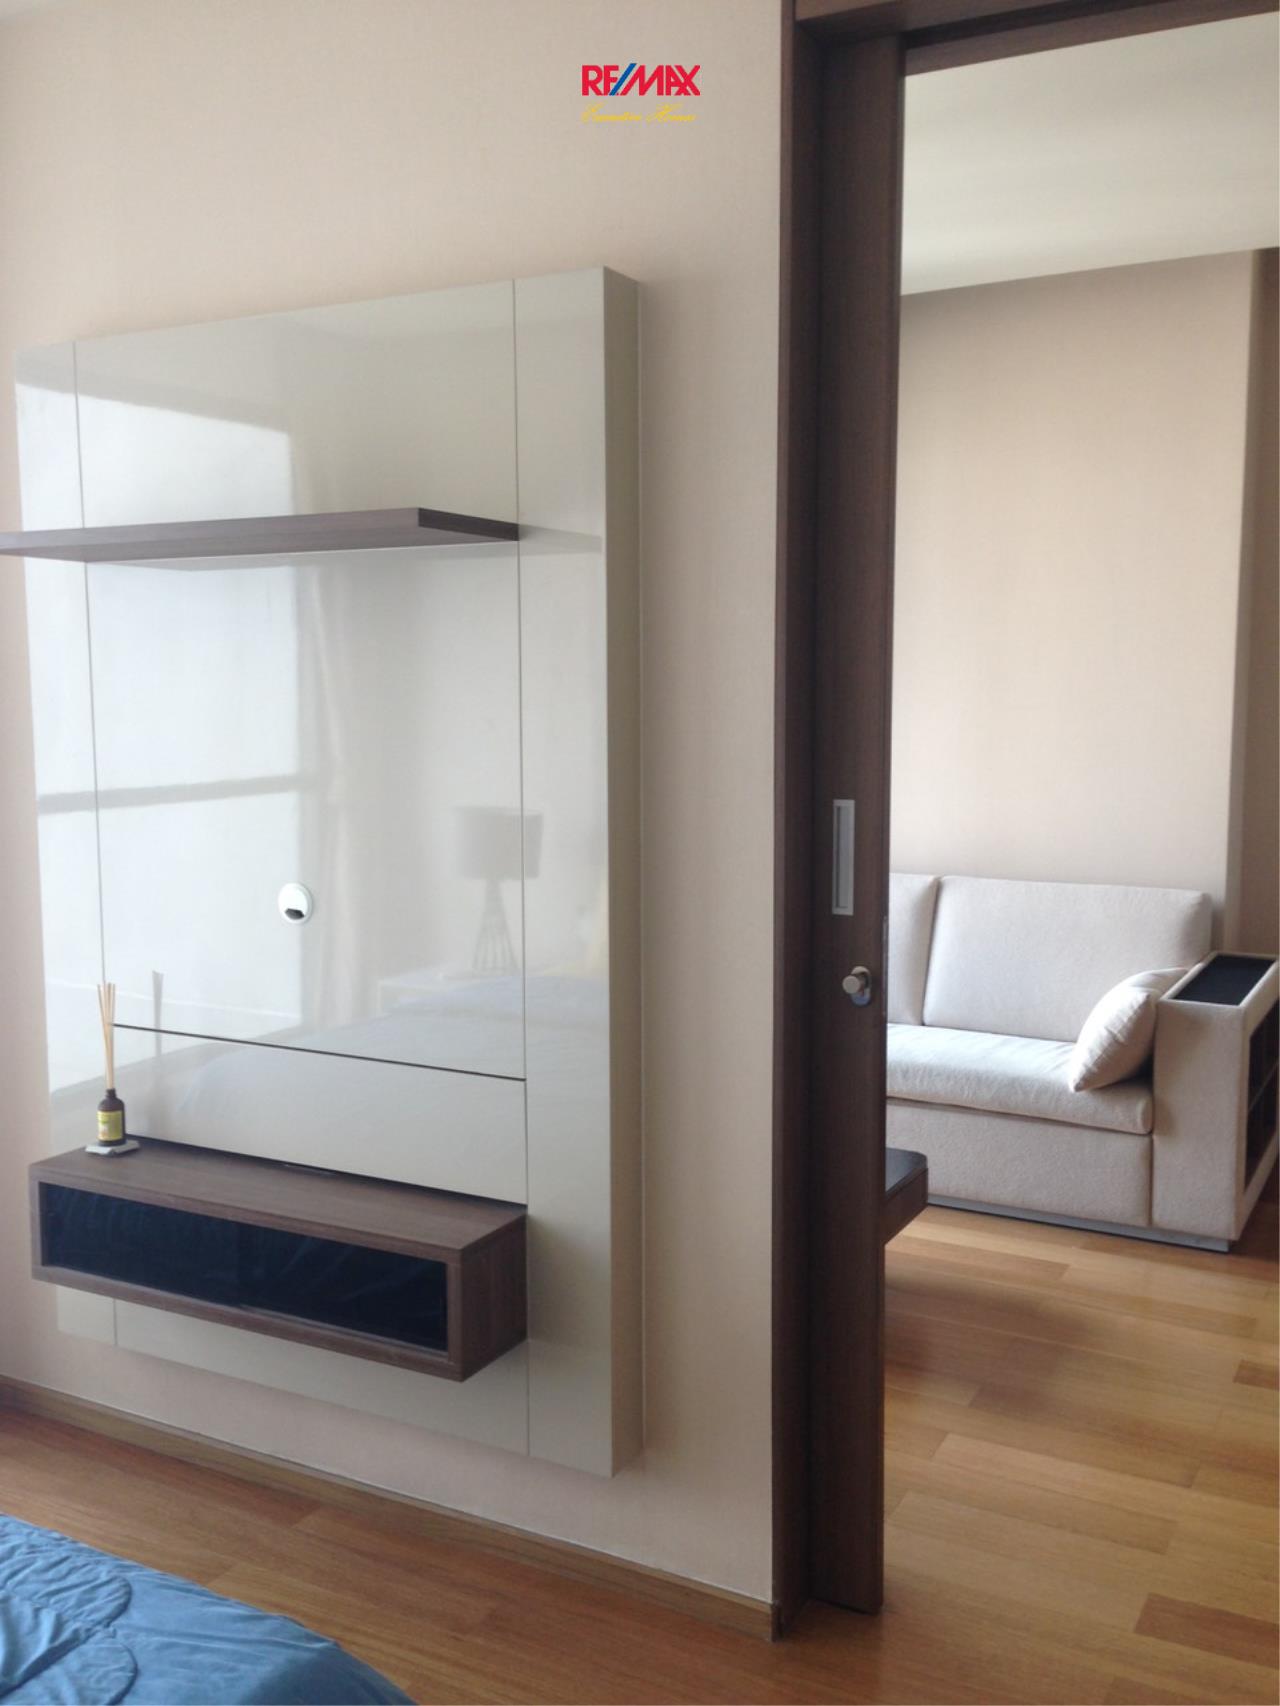 RE/MAX Executive Homes Agency's Beautiful 1 Bedroom for Rent The Address Sathorn 5